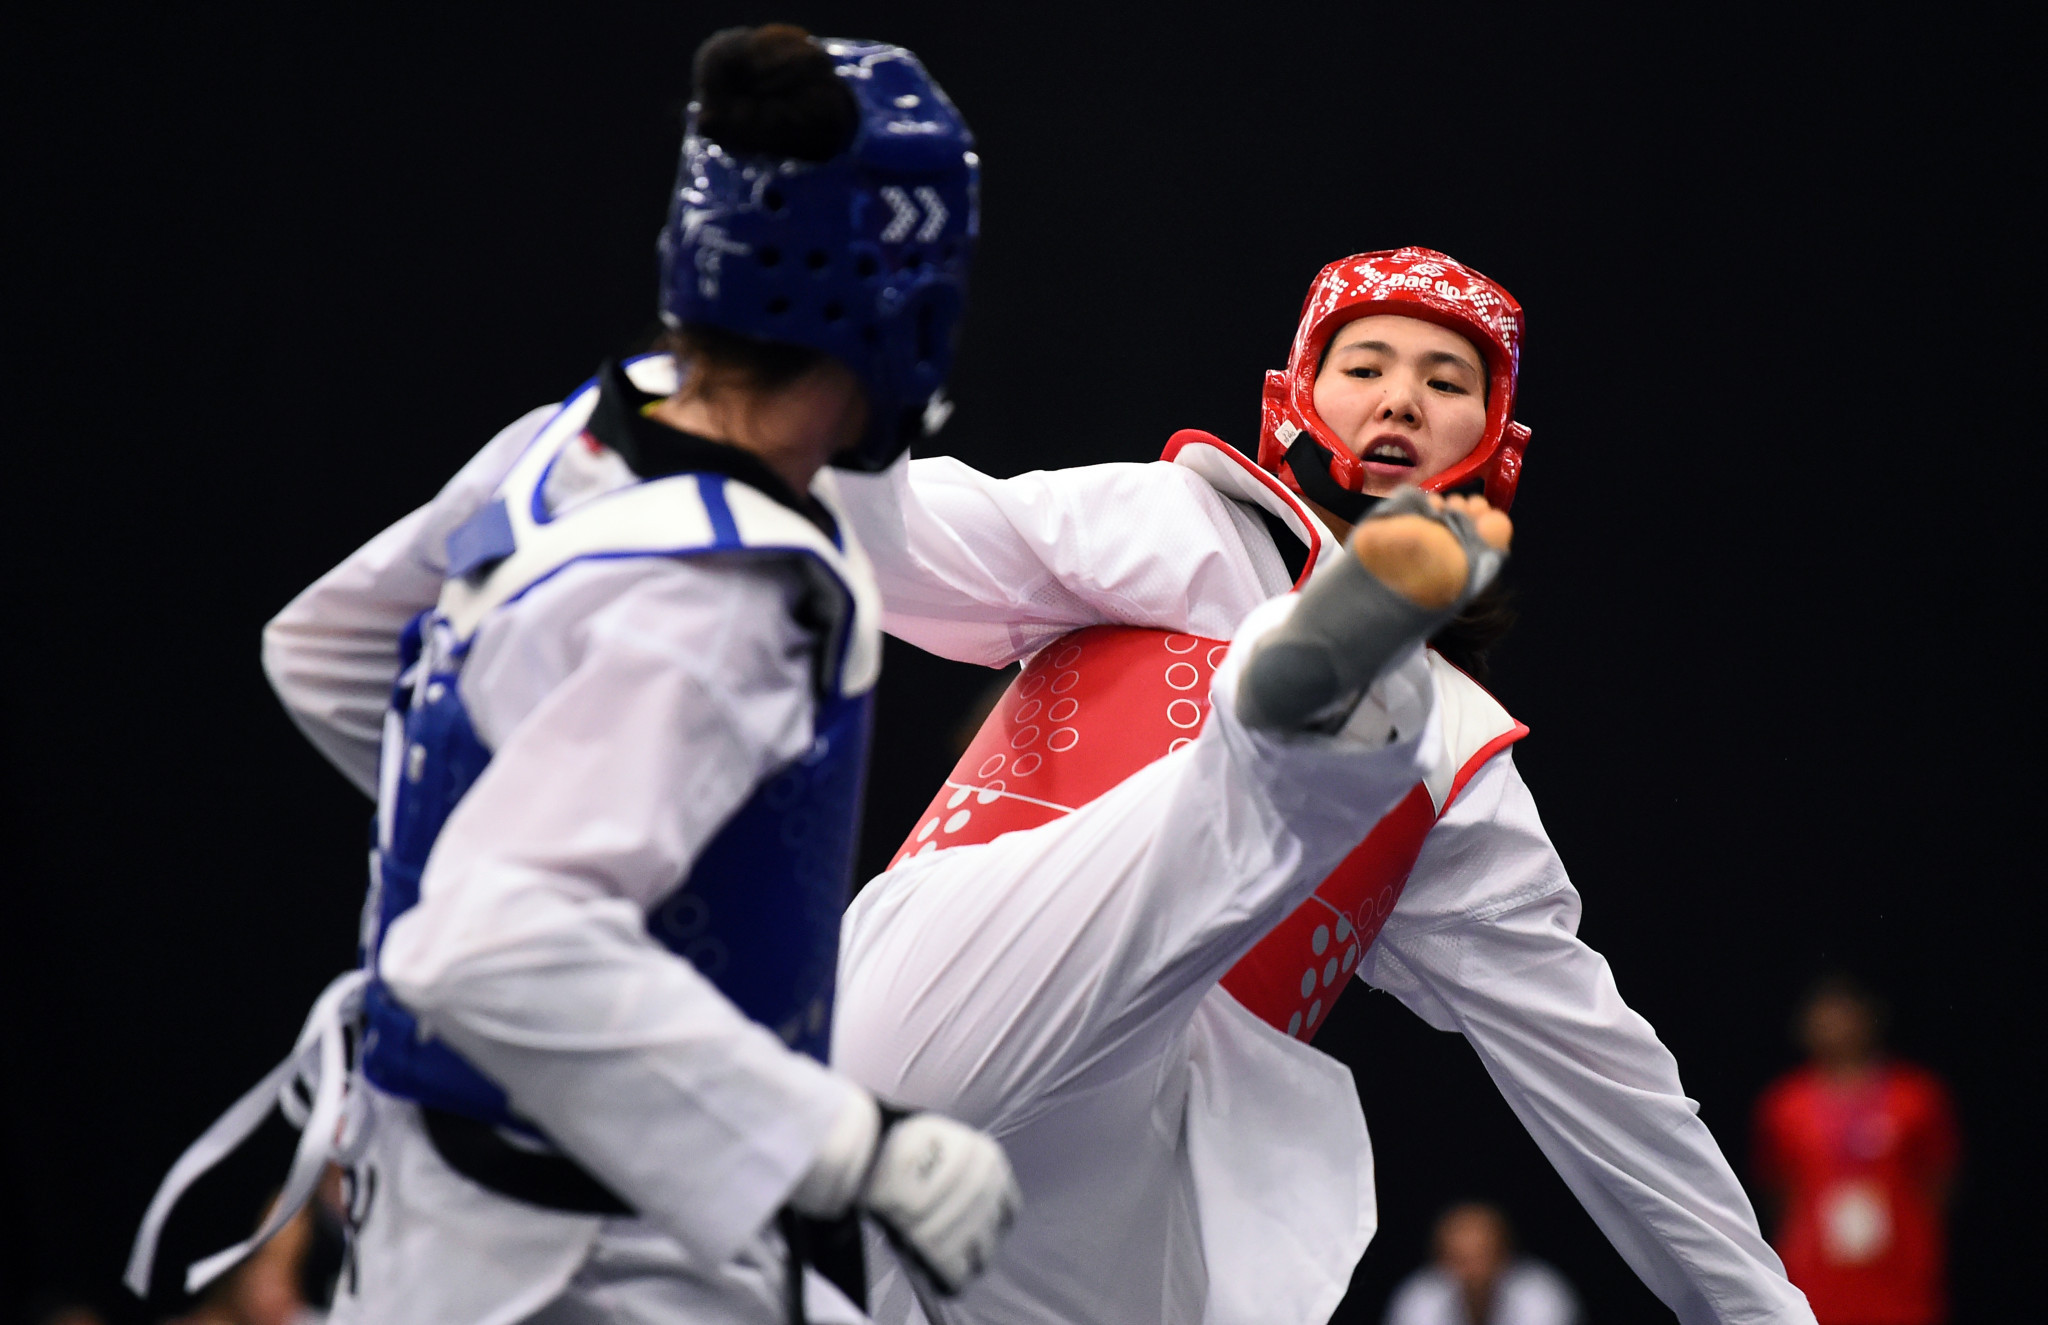 Hosts China win seven out of eight gold medals at World Taekwondo Grand Slam Champions Series qualifier